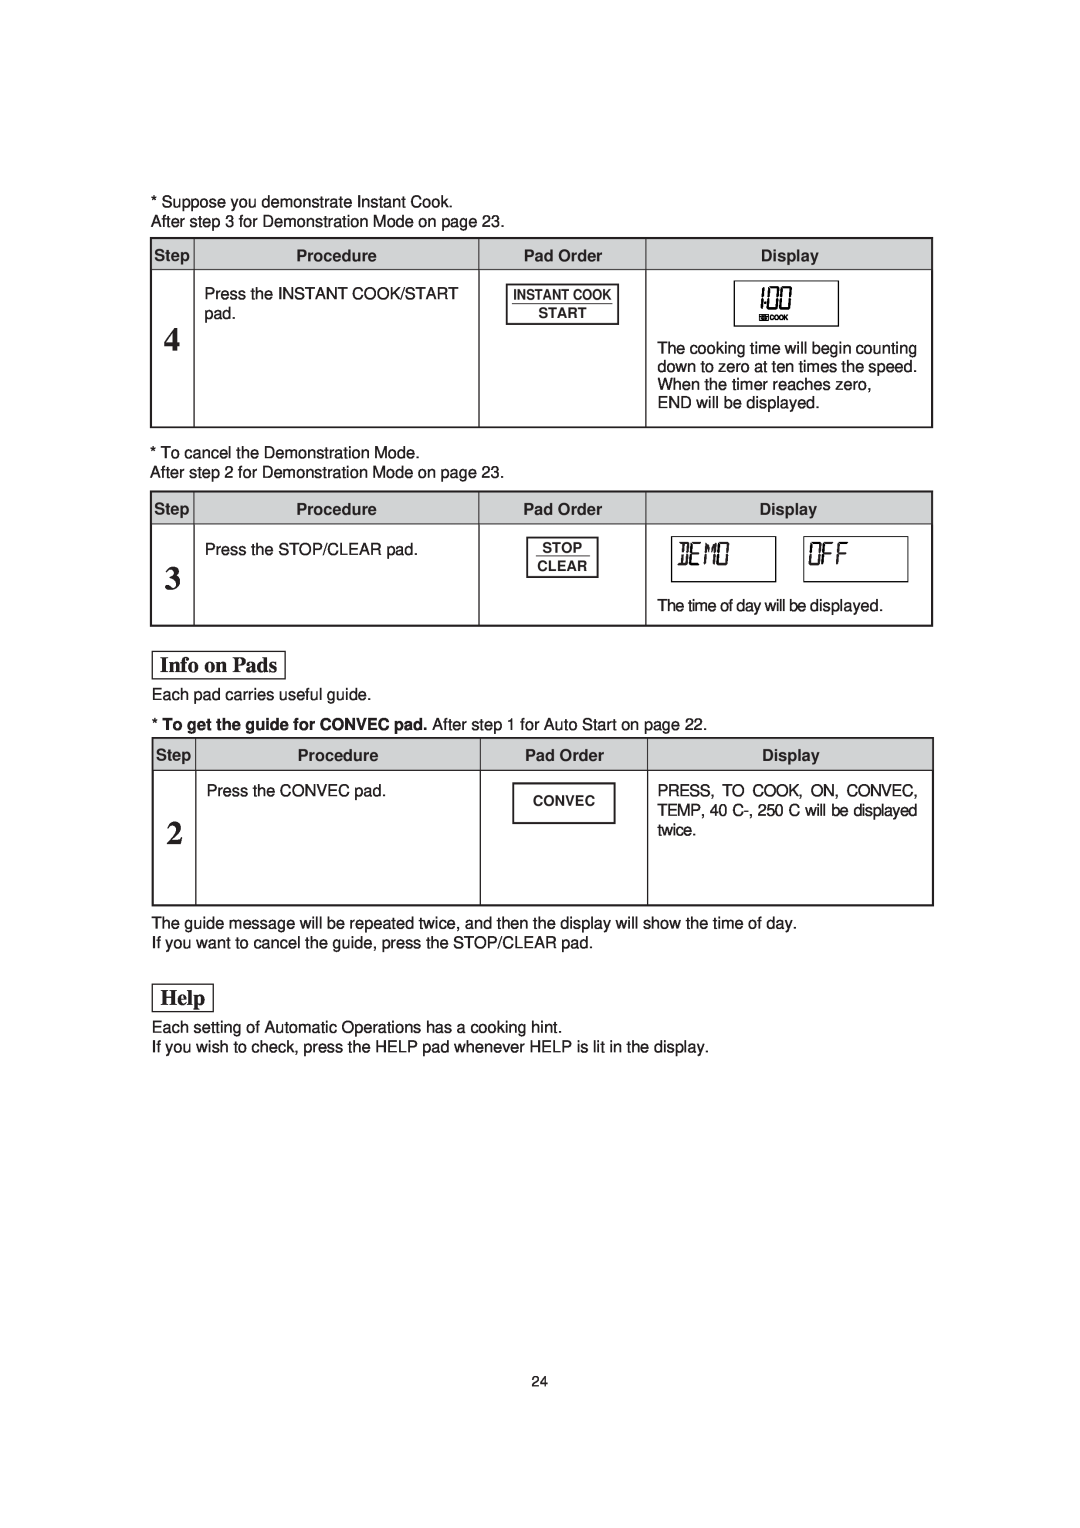 Sharp R-890N operation manual Info on Pads, Help, After for Demonstration Mode on page 